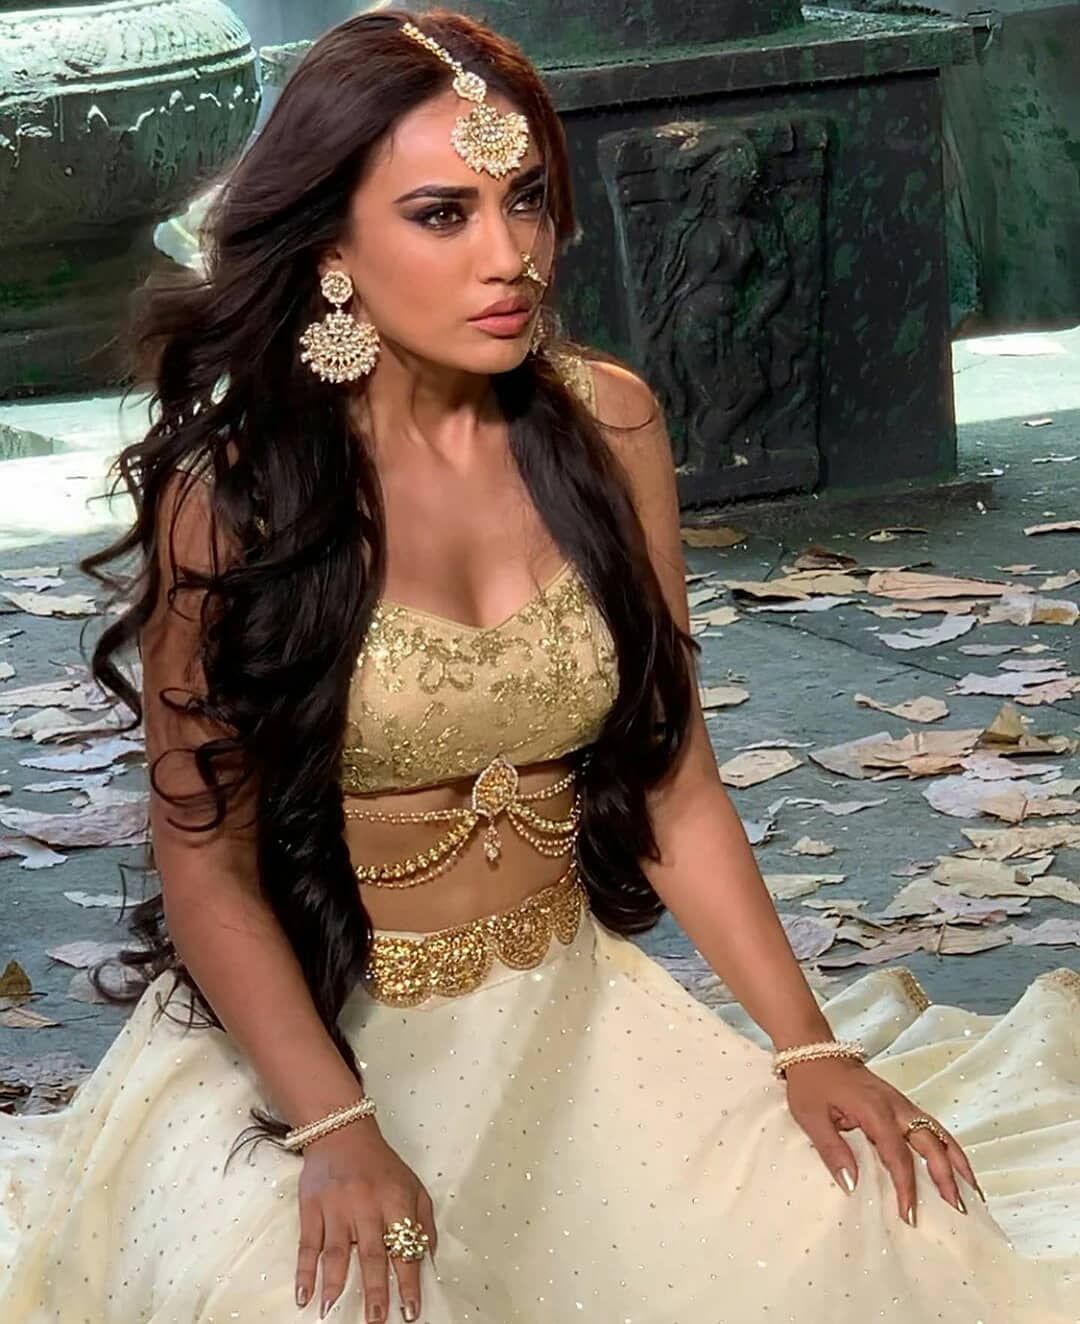 In love with her New Naagin costume ❤